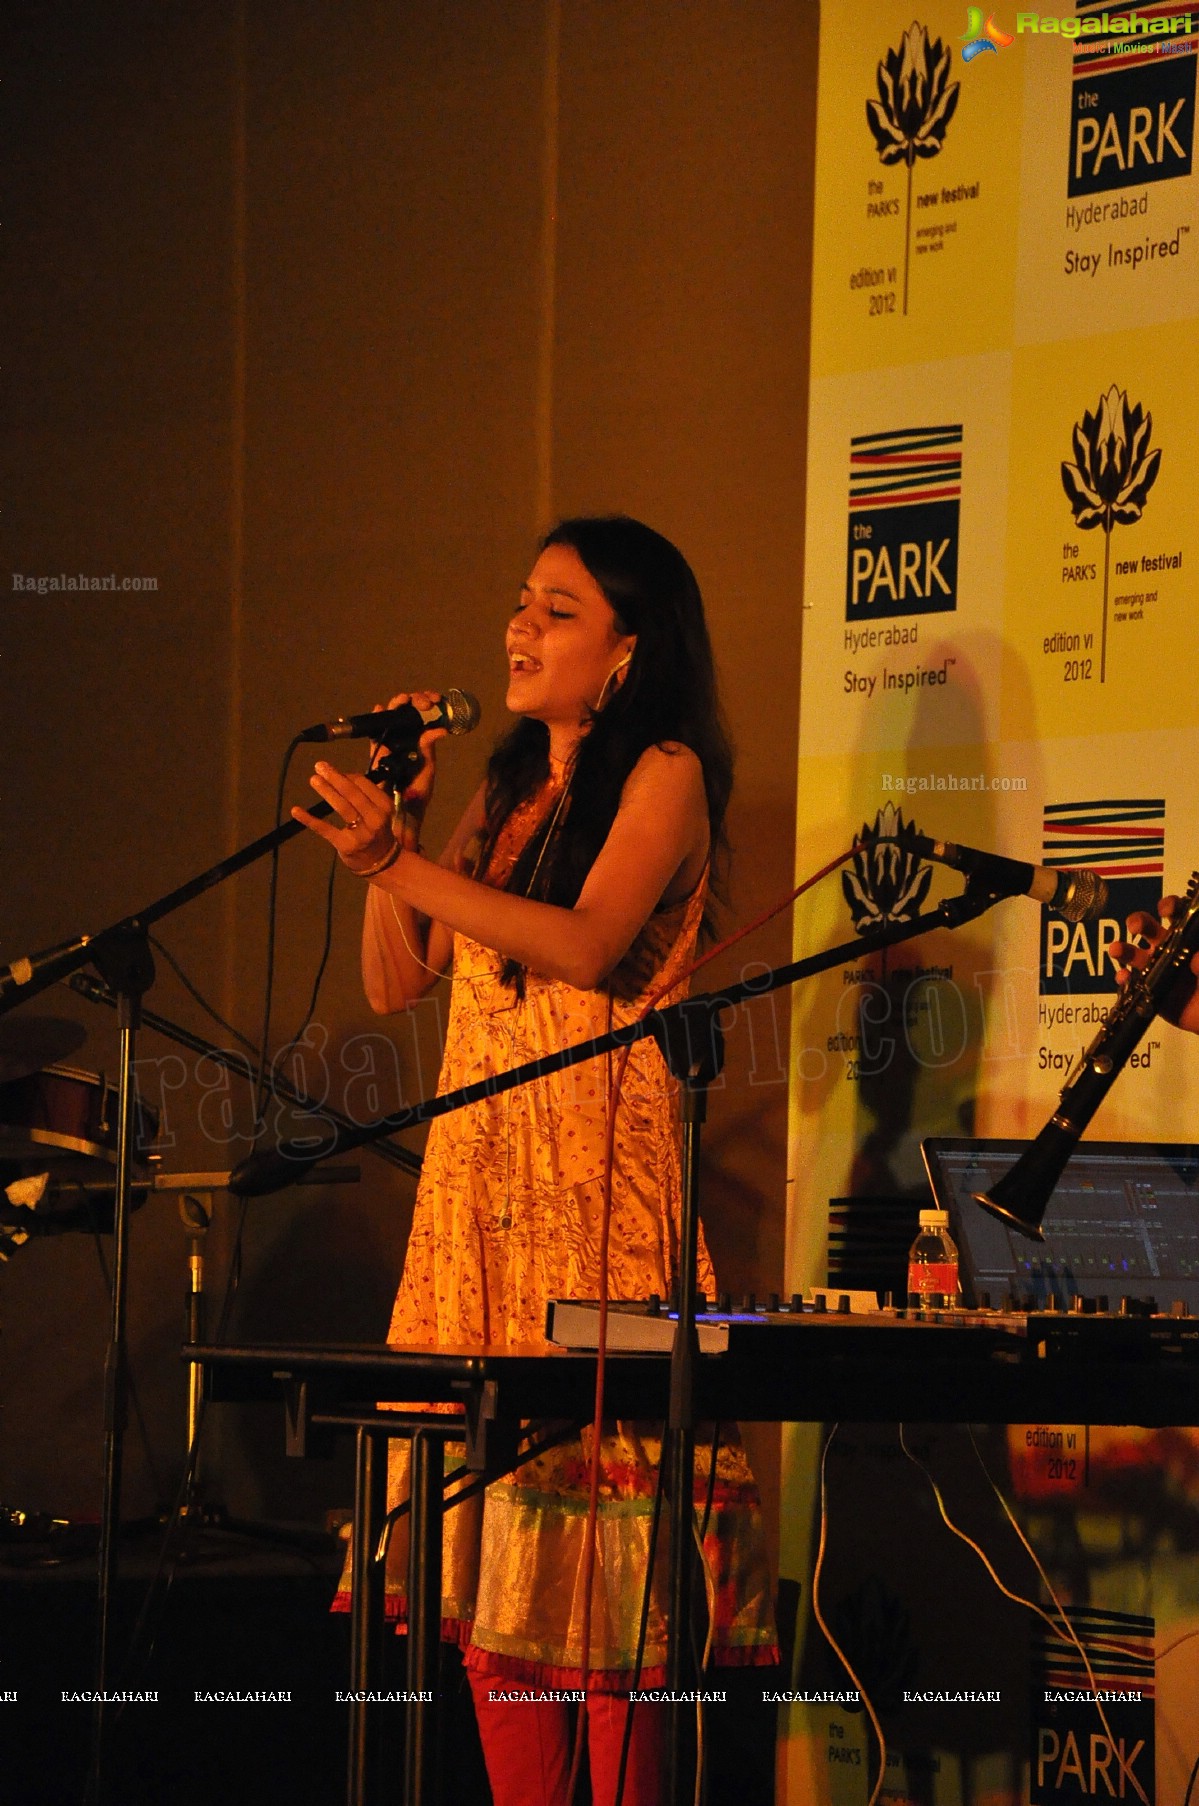 The Park's New Festival 2012, Hyderabad